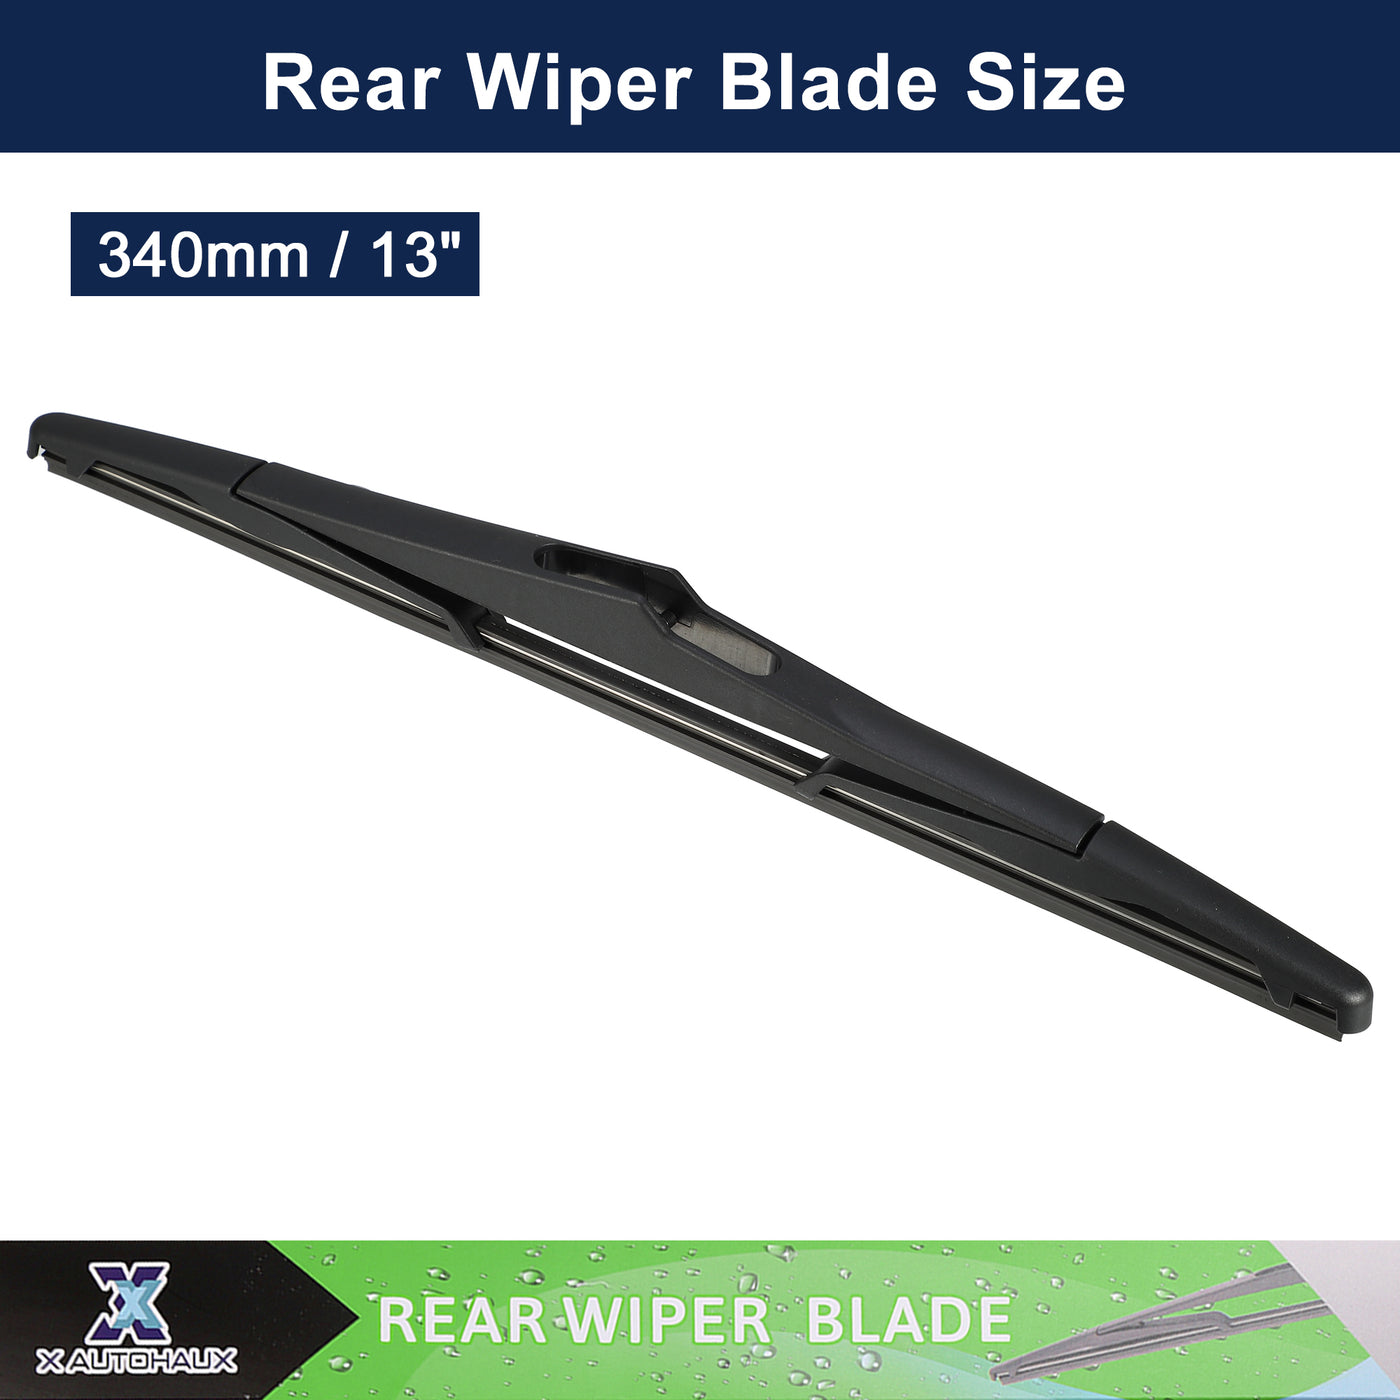 X AUTOHAUX Rear Windshield Wiper Blade Replacement for Jeep Wrangler JK 2007 2008 2009 2010 2011 2012 2013 2014 2015 2016 2017 2018